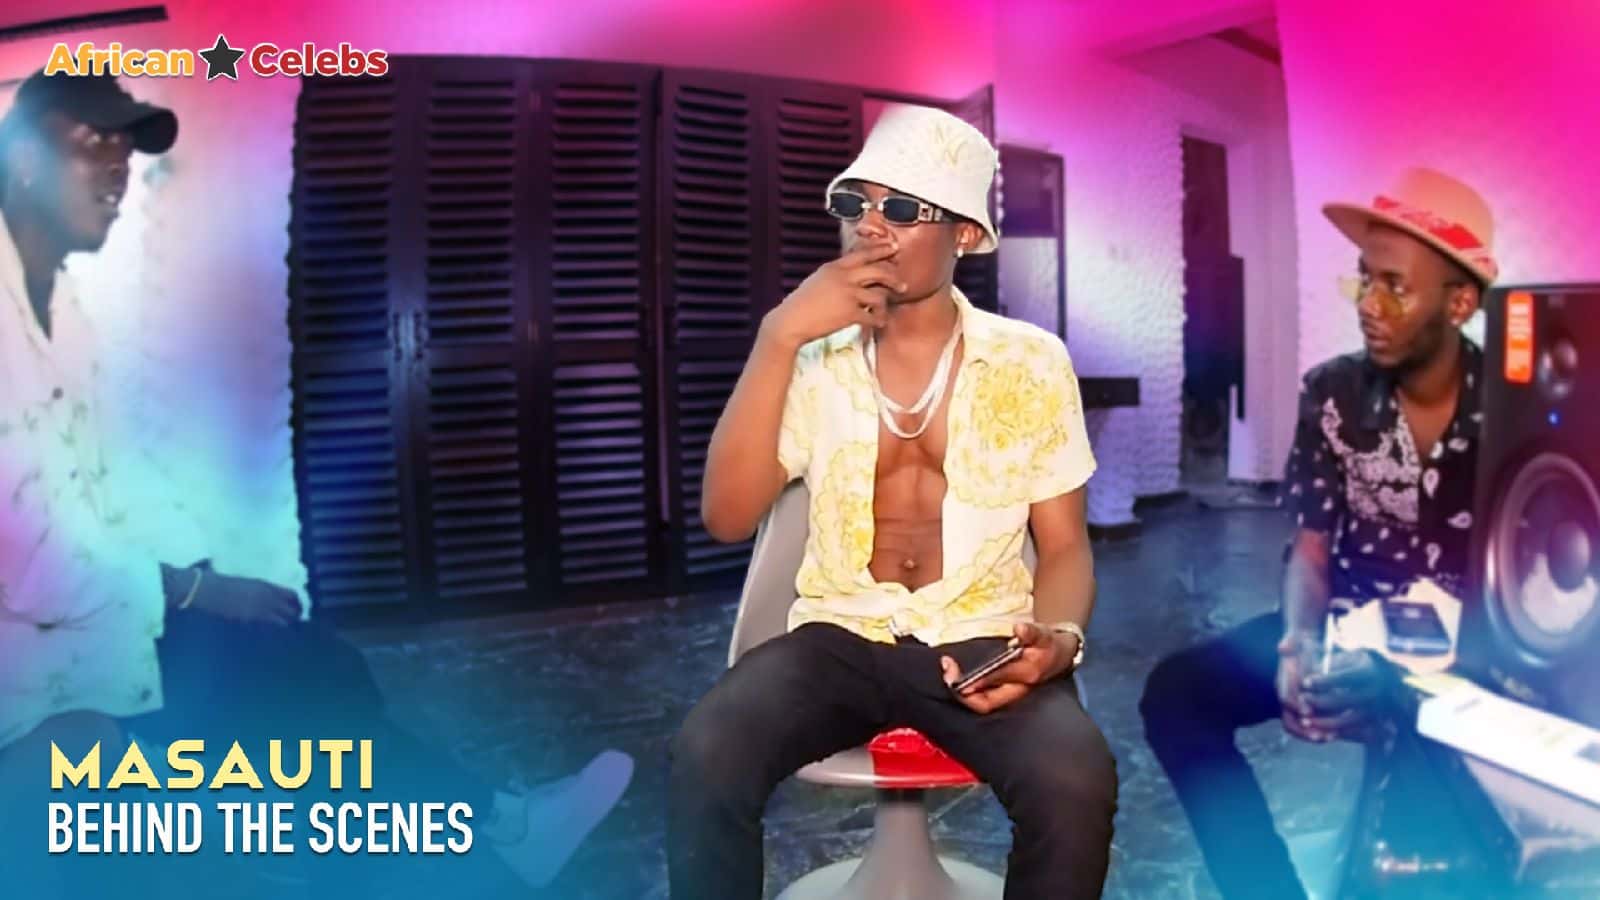 African Celebs Masauti - Behind The Scenes